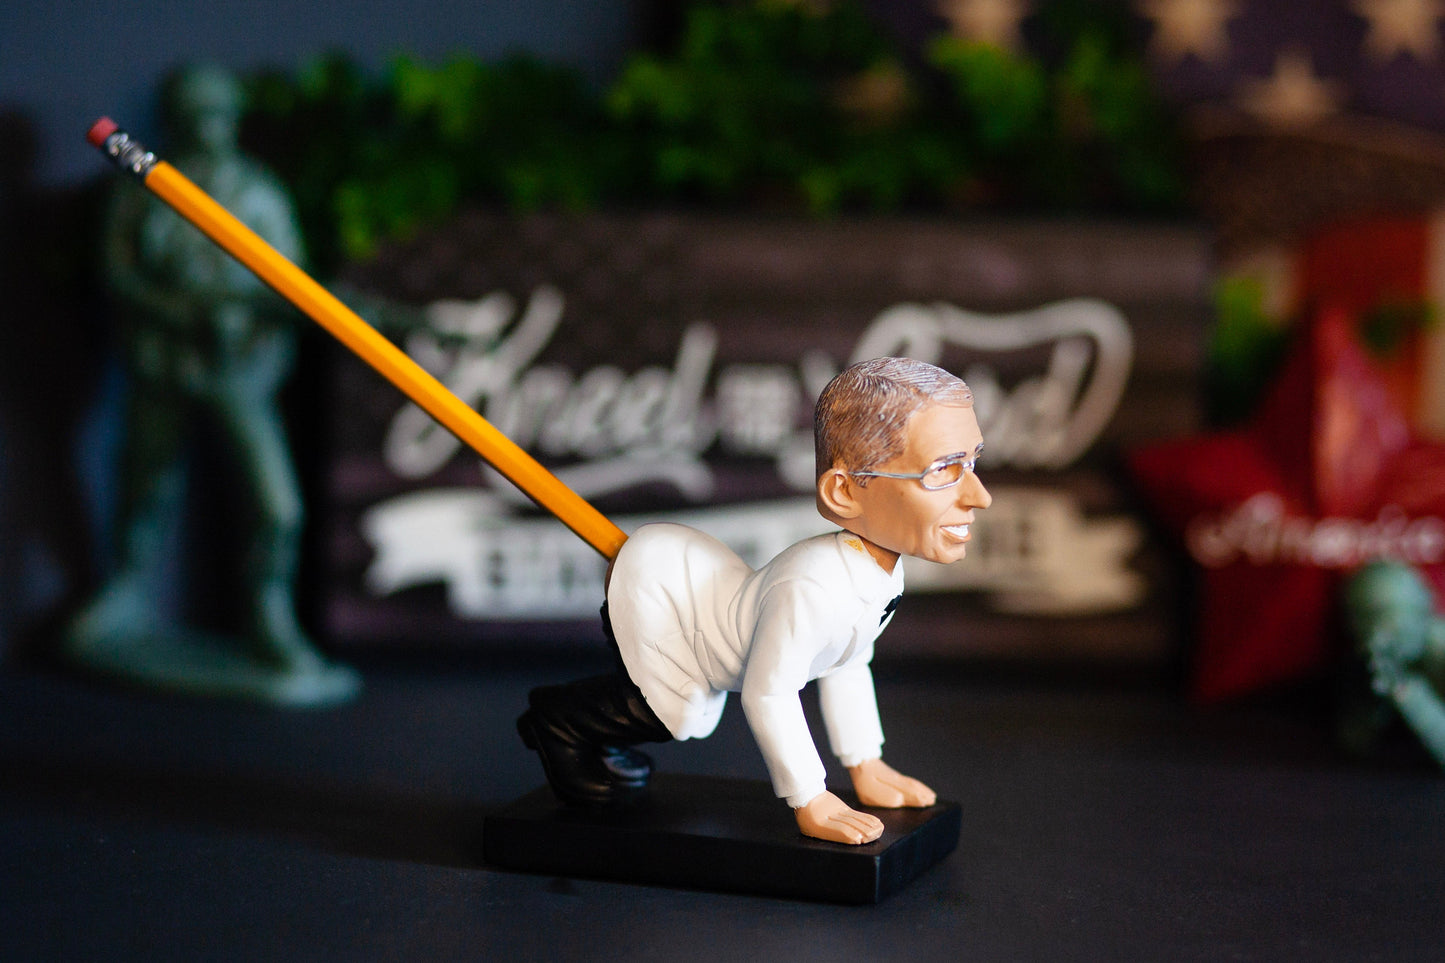 Dr. Fauci Funny Novelty Pencil Holder Bobble - 2 Pieces